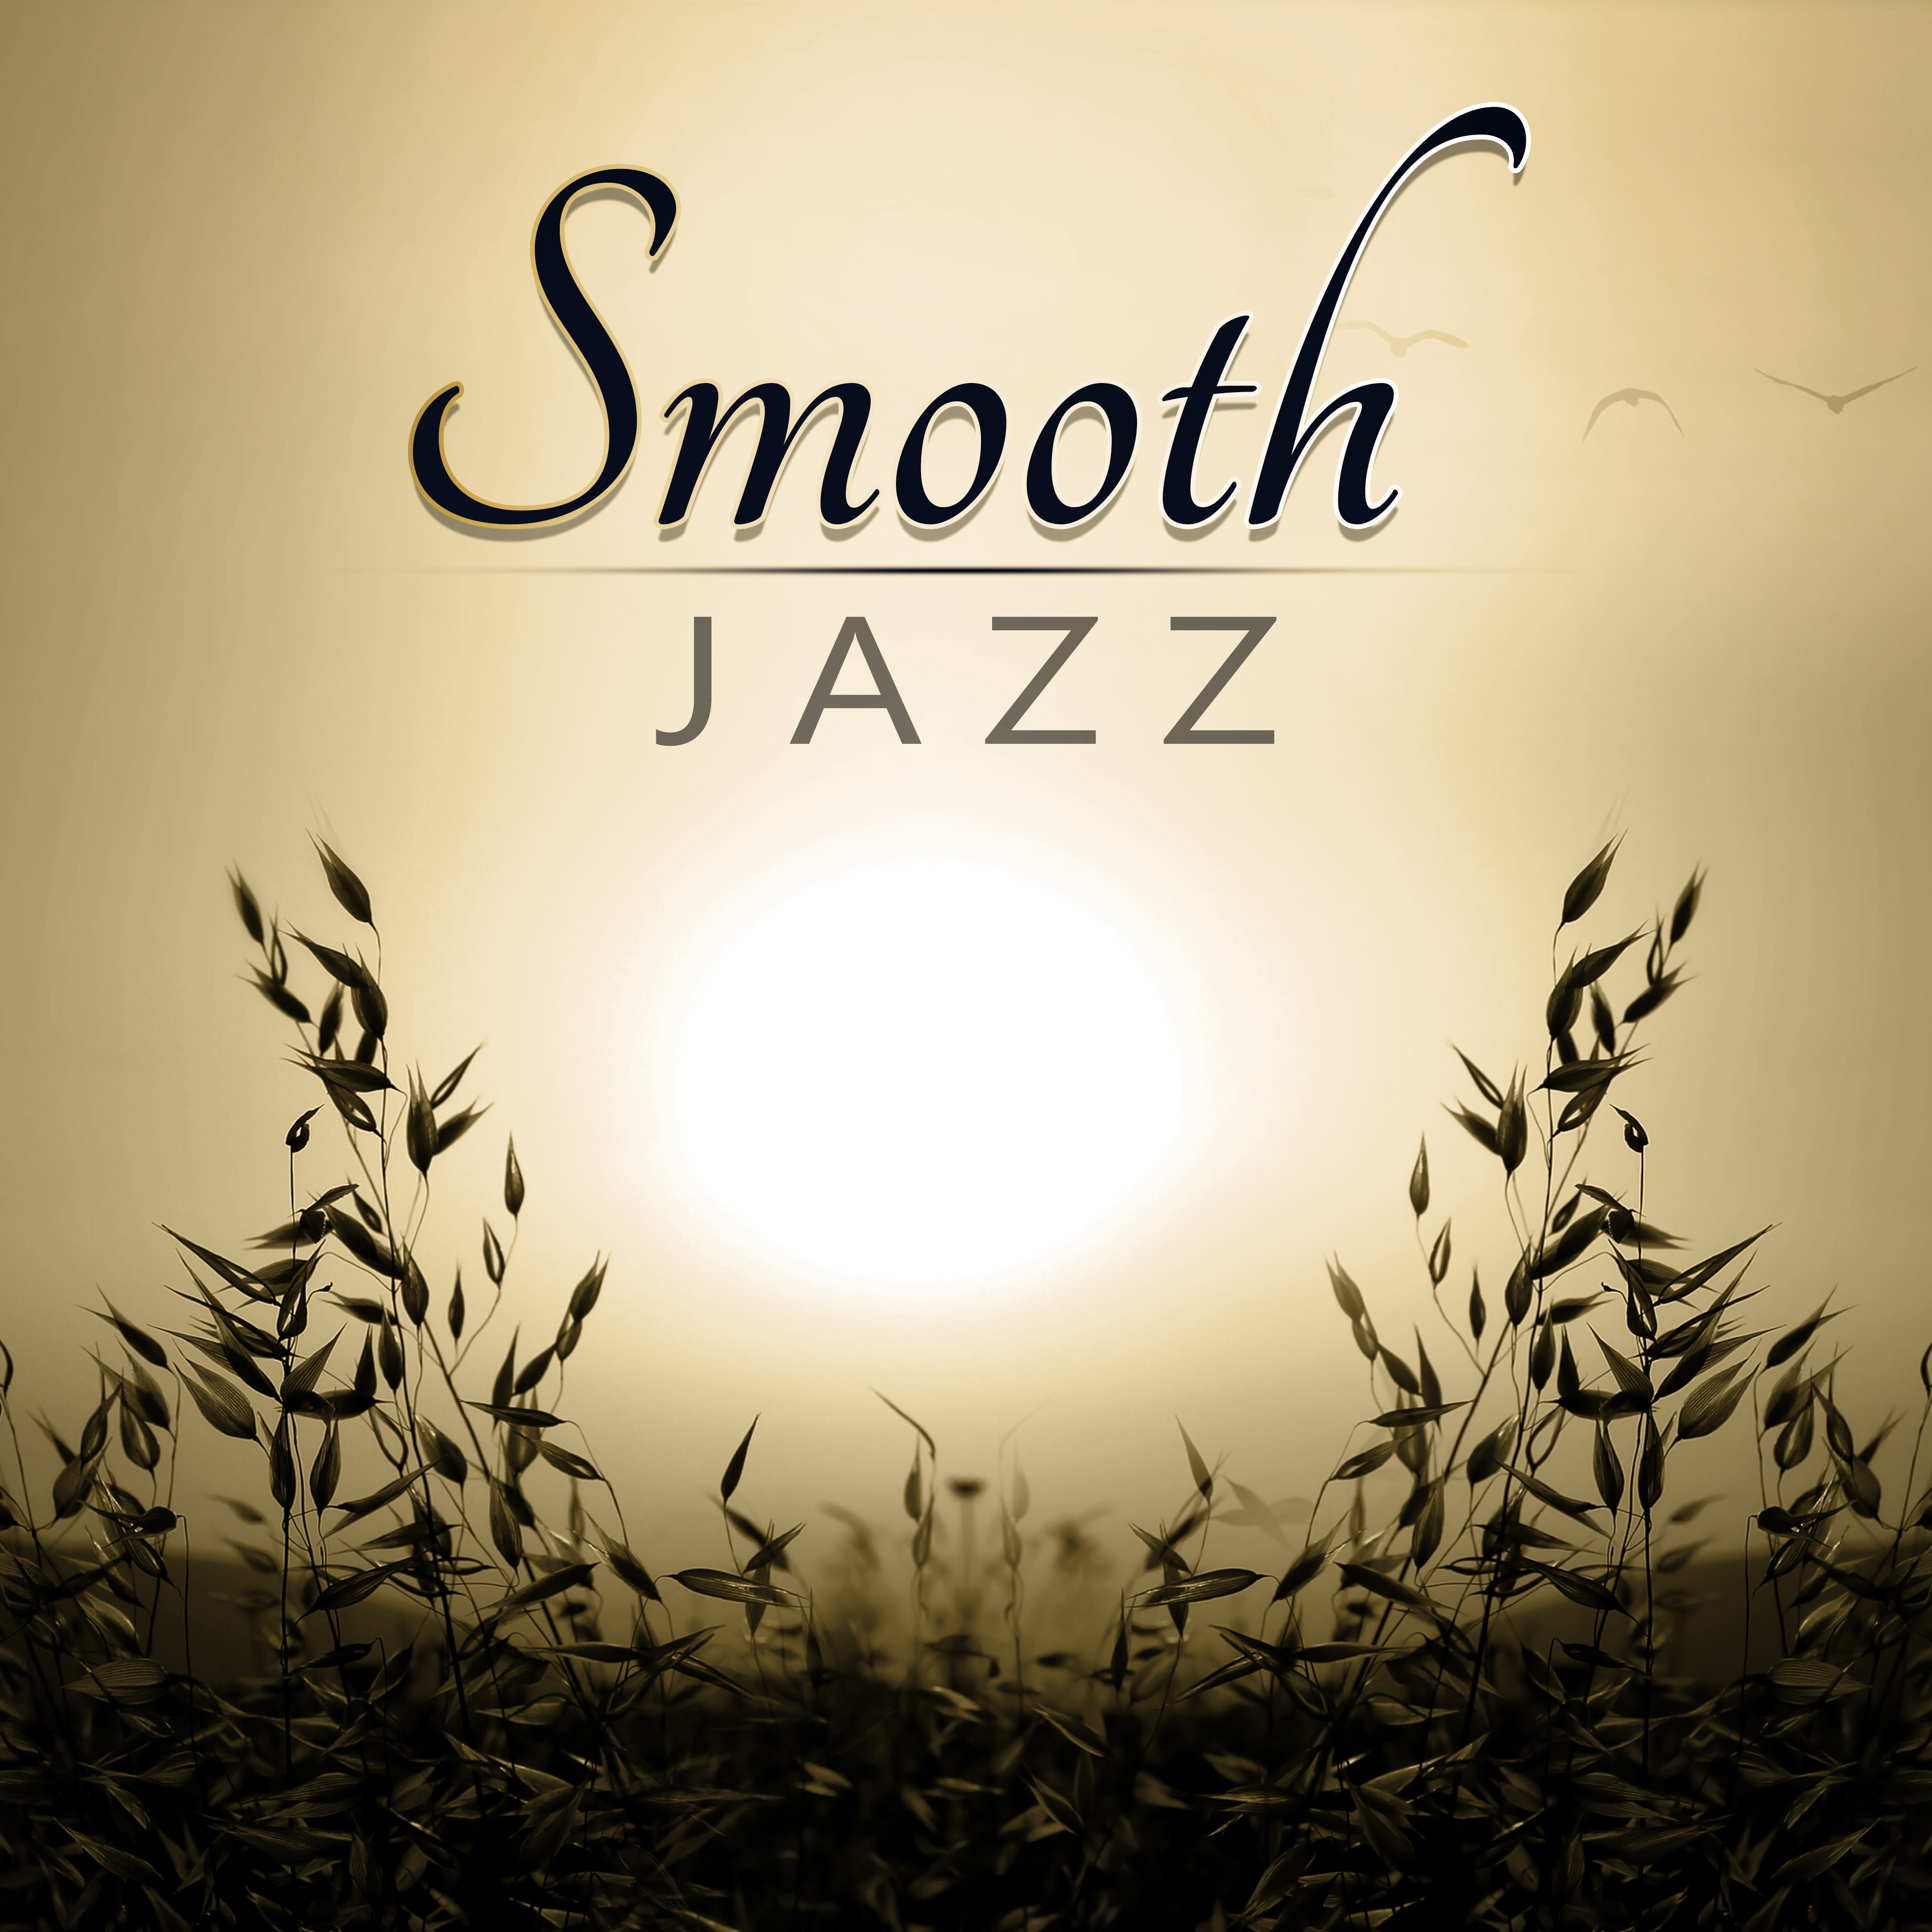 Smooth Jazz - Piano Bar, Chill Out Music, Gentle Piano Music for Family Time, Coffee Break, Luxury Lounge, Meet Friends, Time for Tea, Home Sweet Home